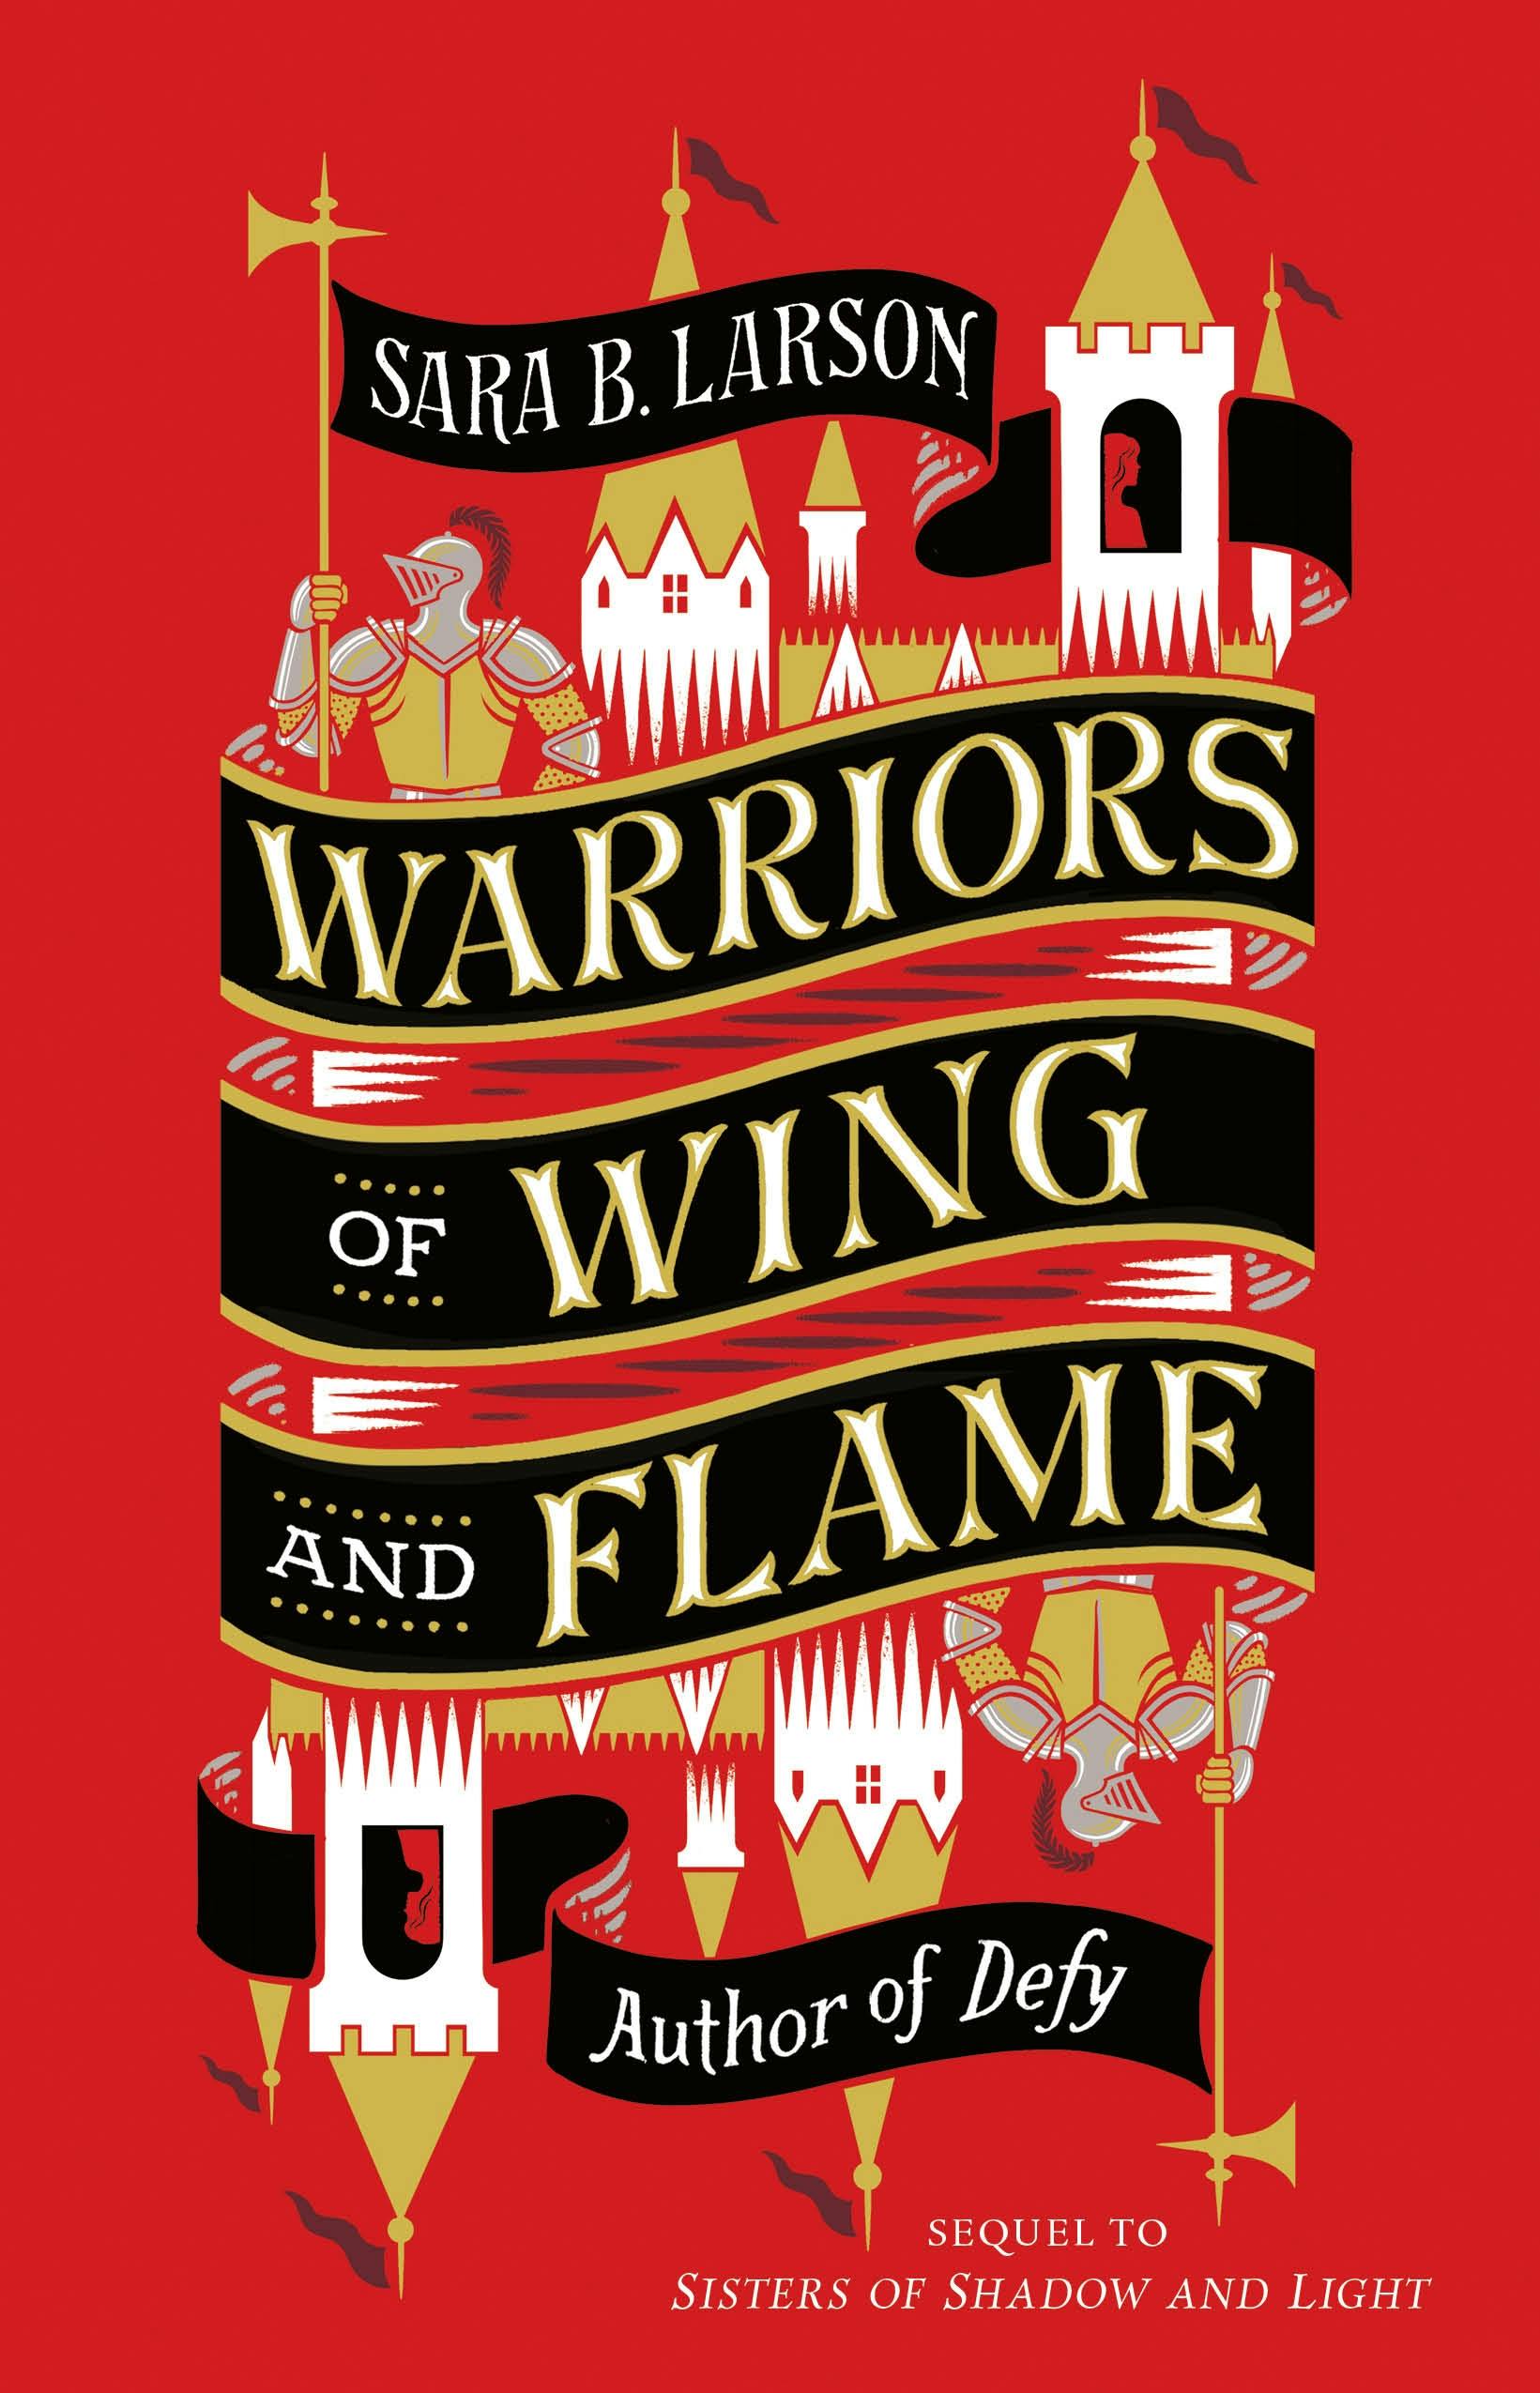 Cover for the book titled as: Warriors of Wing and Flame